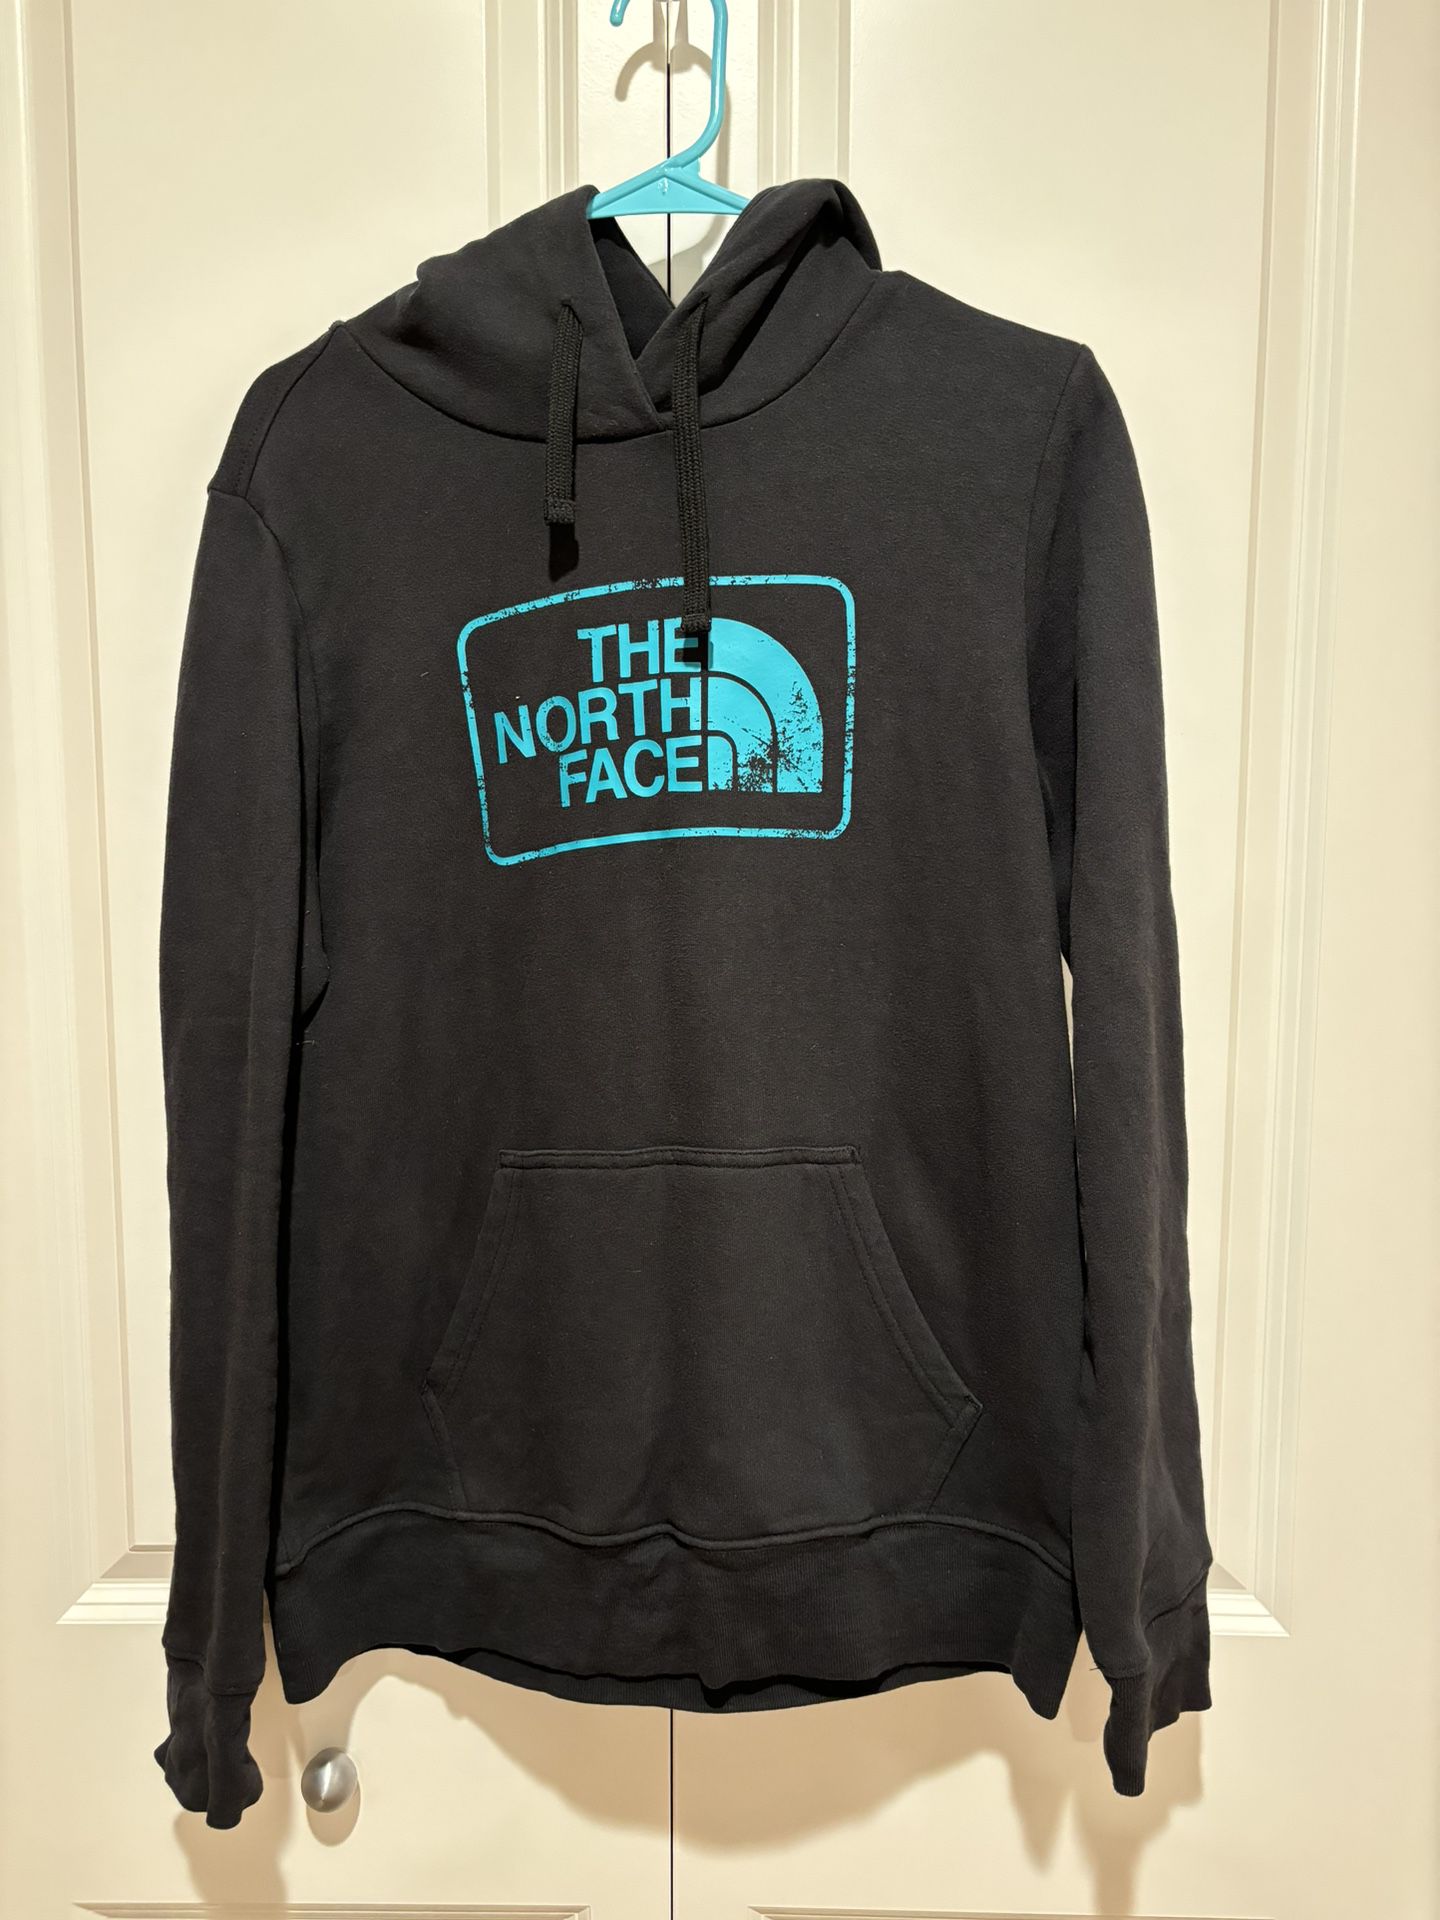 Women’s Large The North Face Hoodie